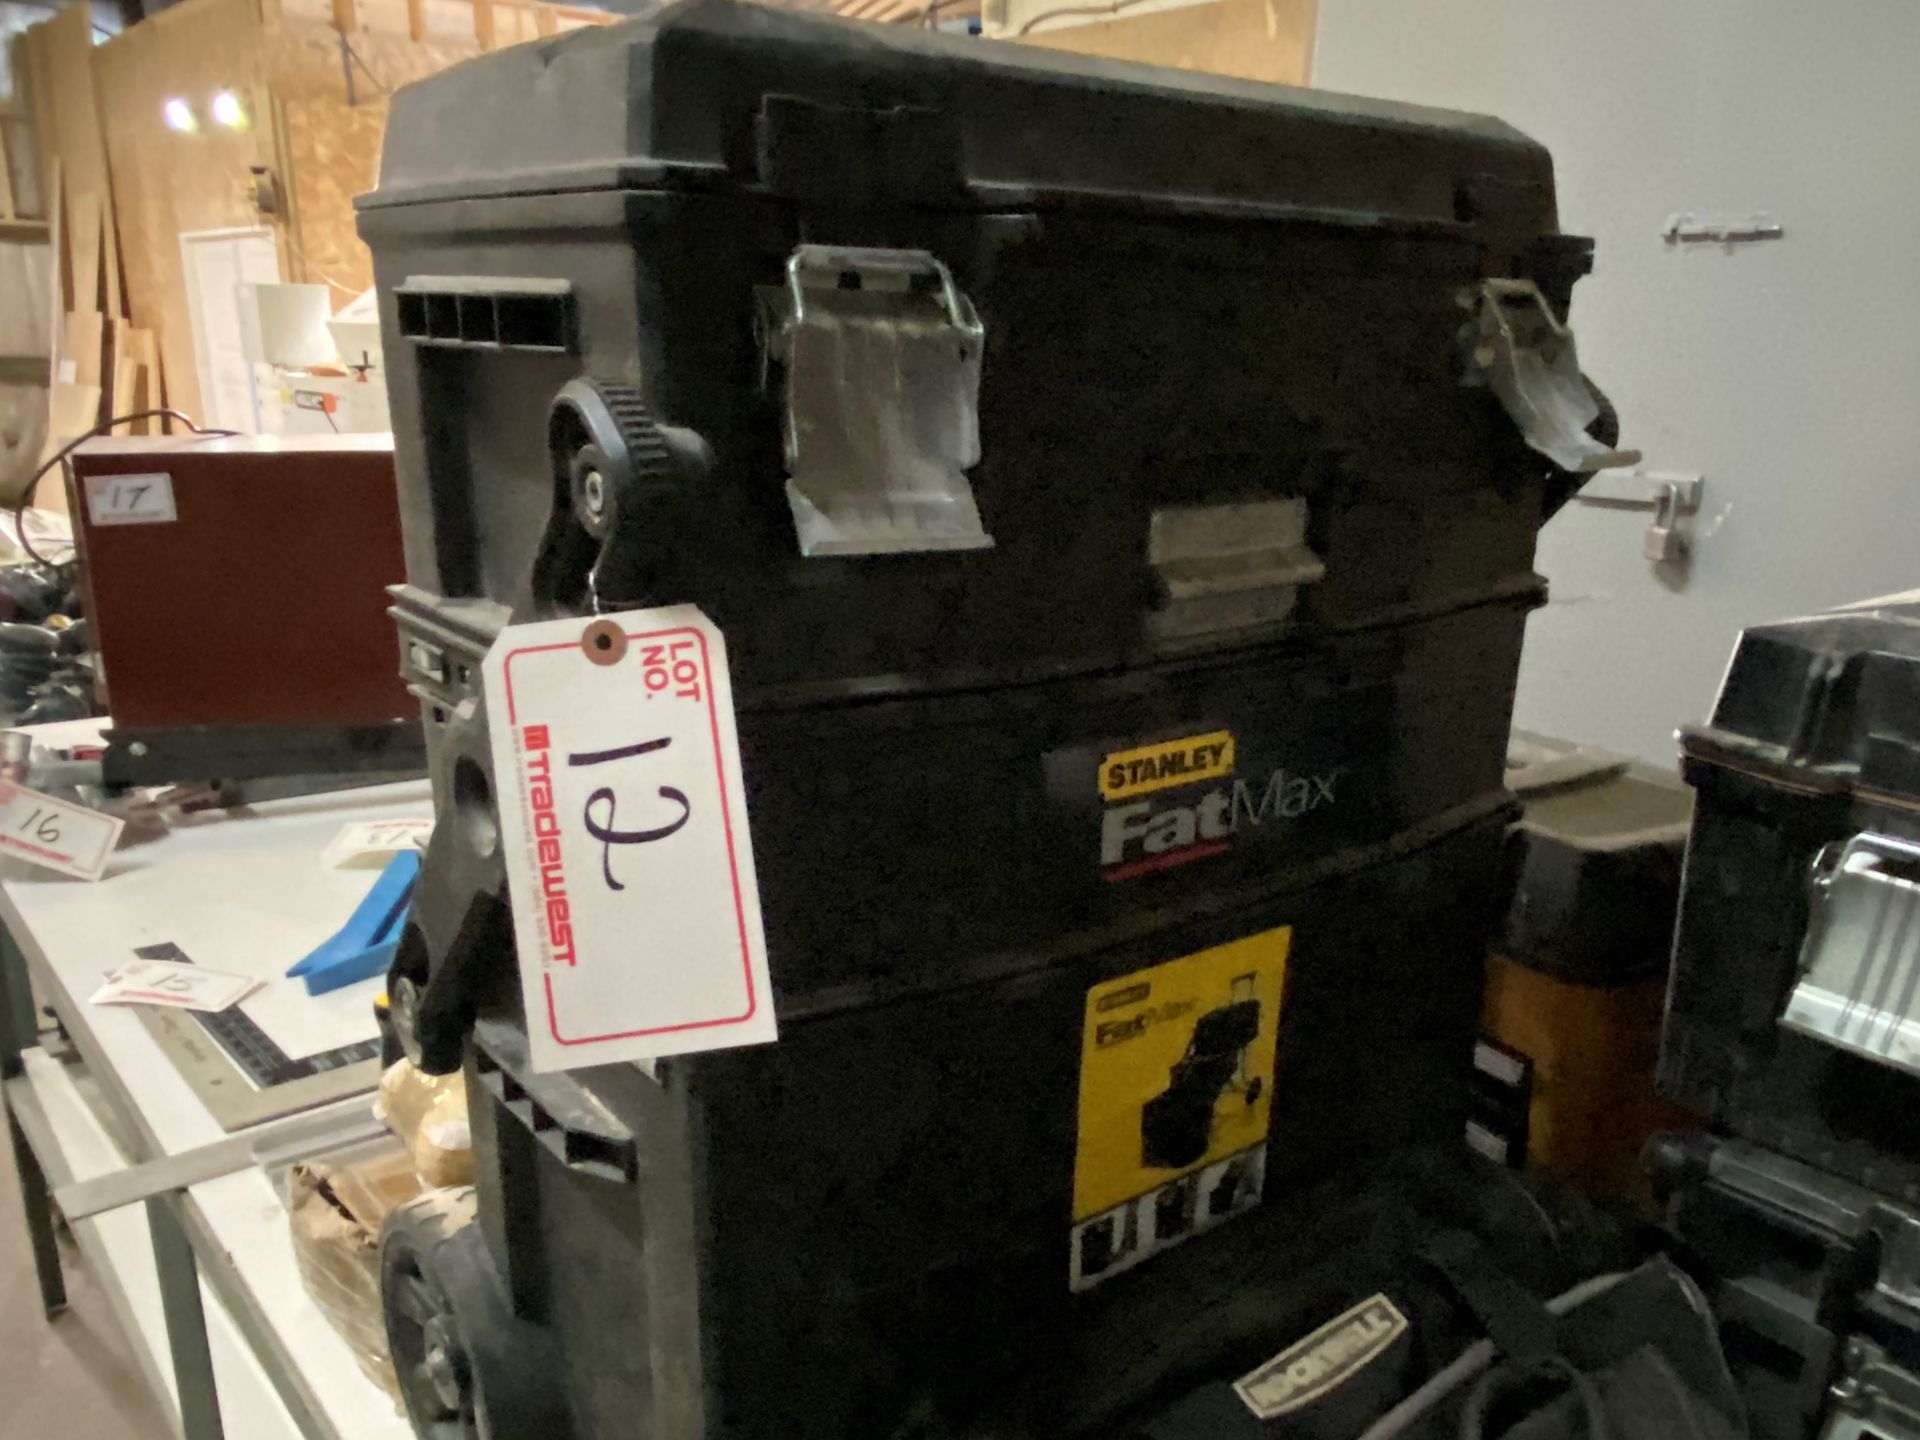 STANLEY FAT MAX ROLLING TOOL BOX